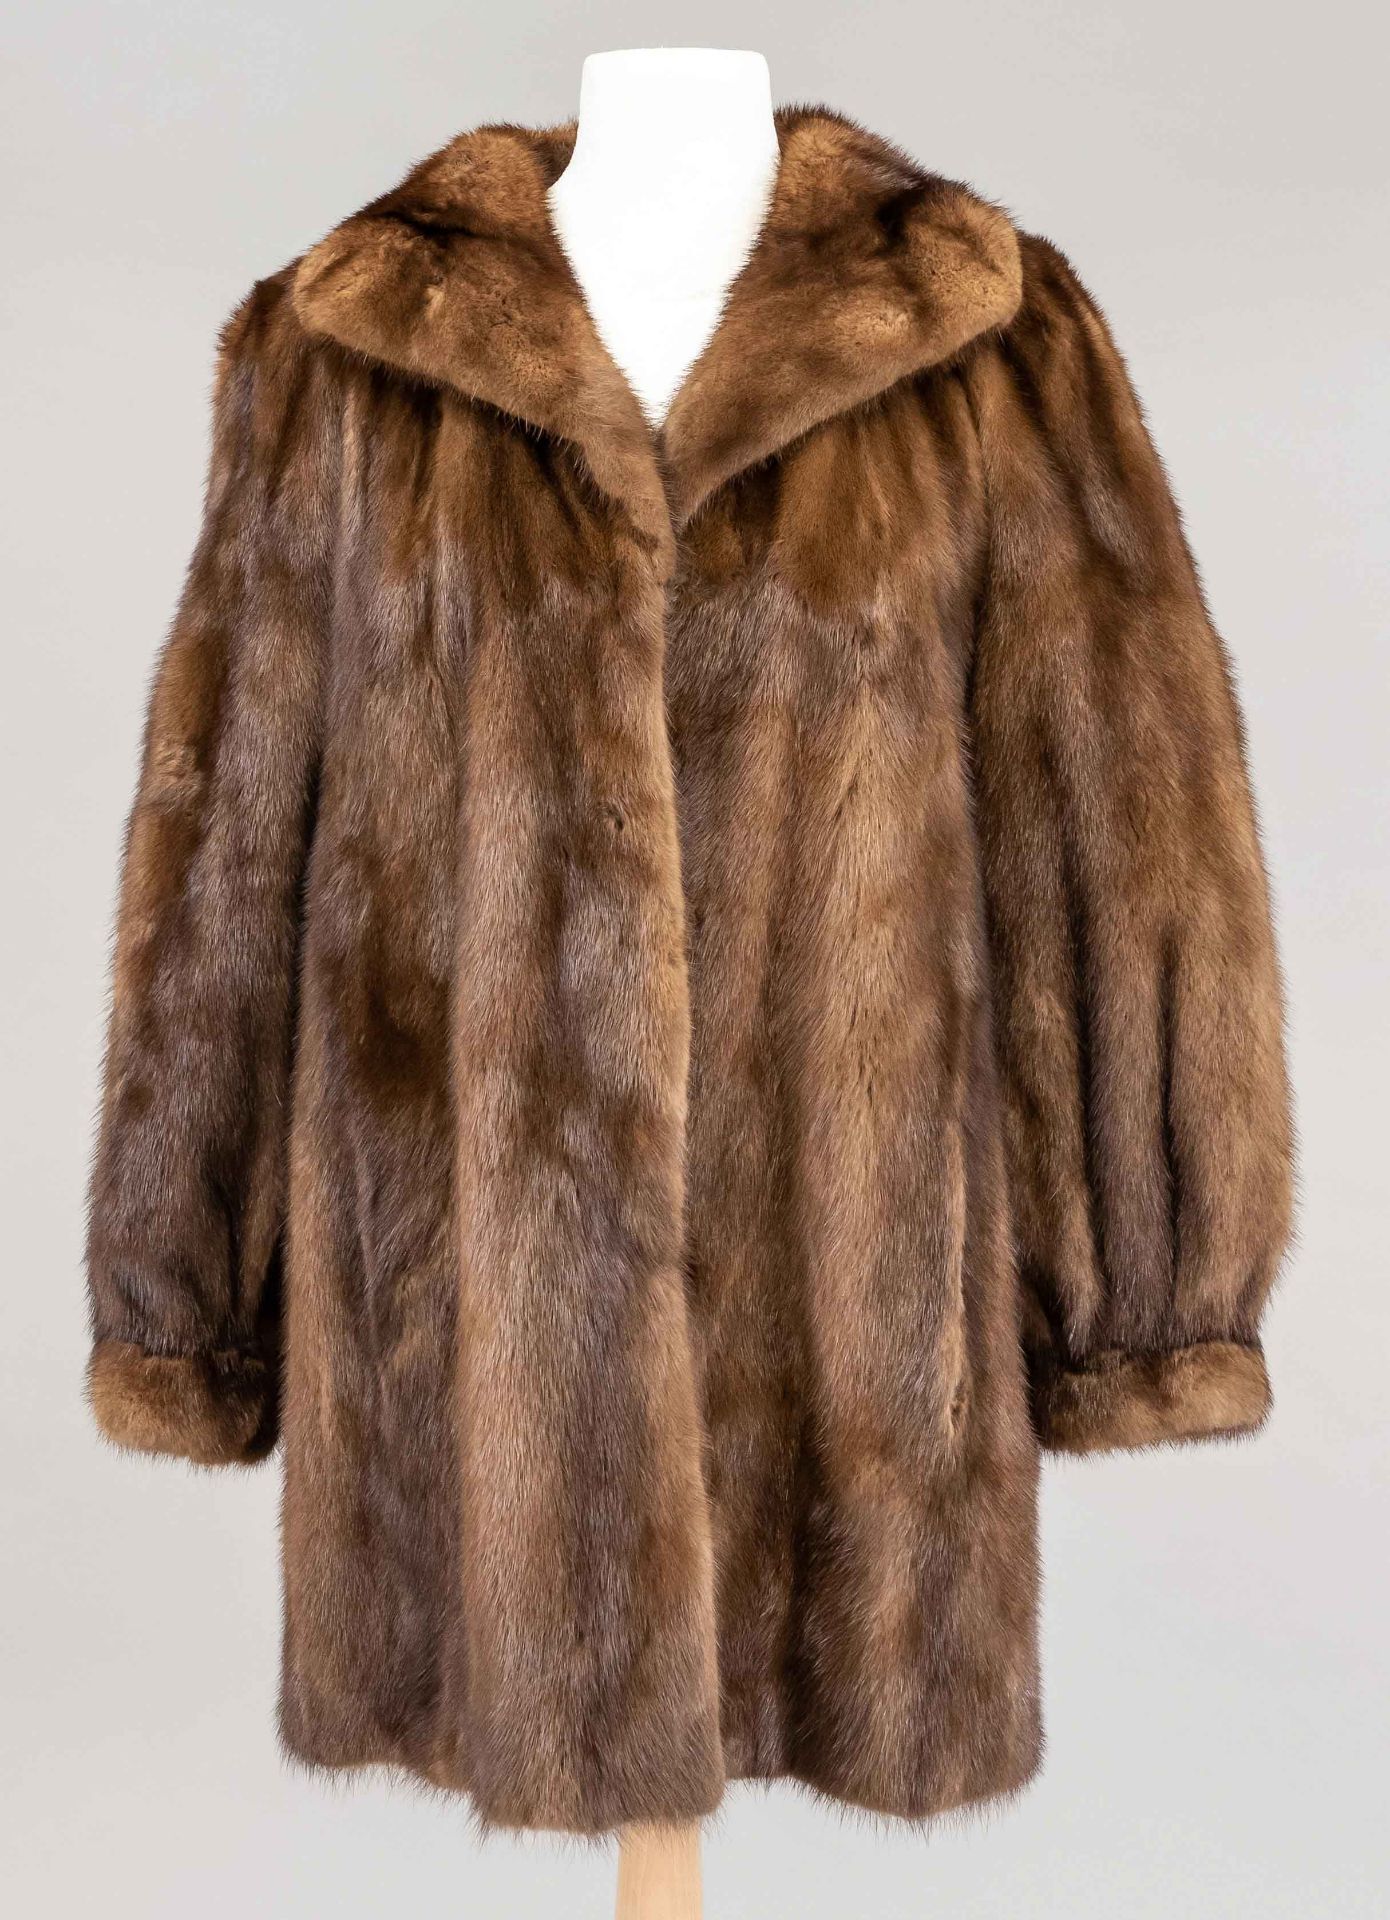 Women's mink jacket, marked Your Sixth Scythe/Saga Mink on a label in the lining. Without size